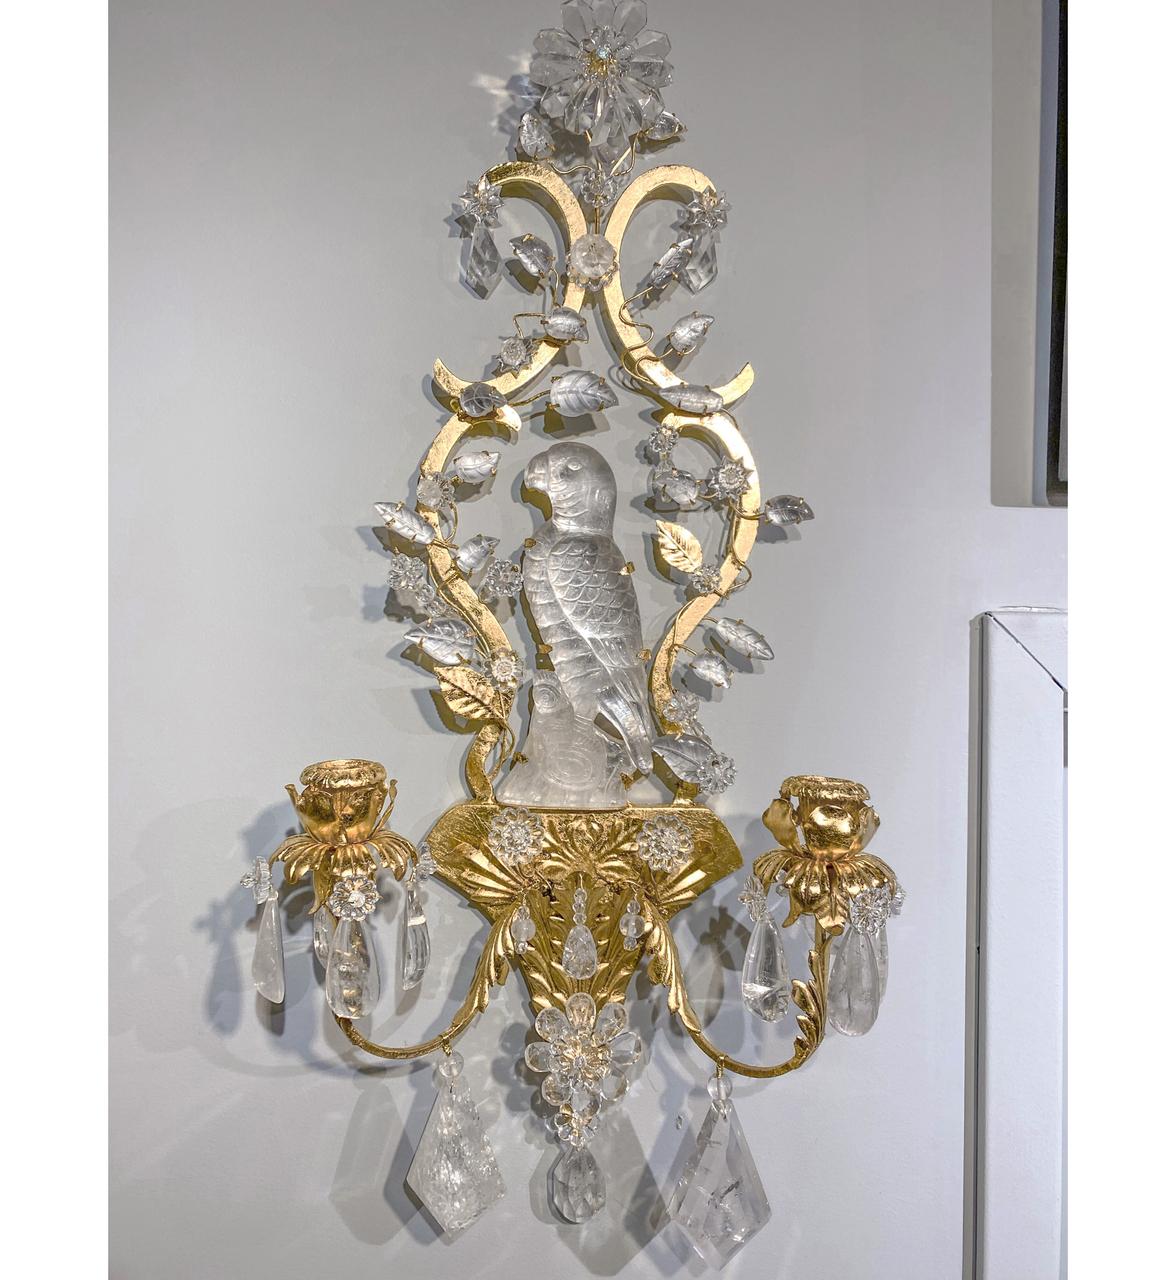 20th Century Rock Crystal and Gilt Bronze Sconces with Floral Accents & Carved Perched Parrot For Sale